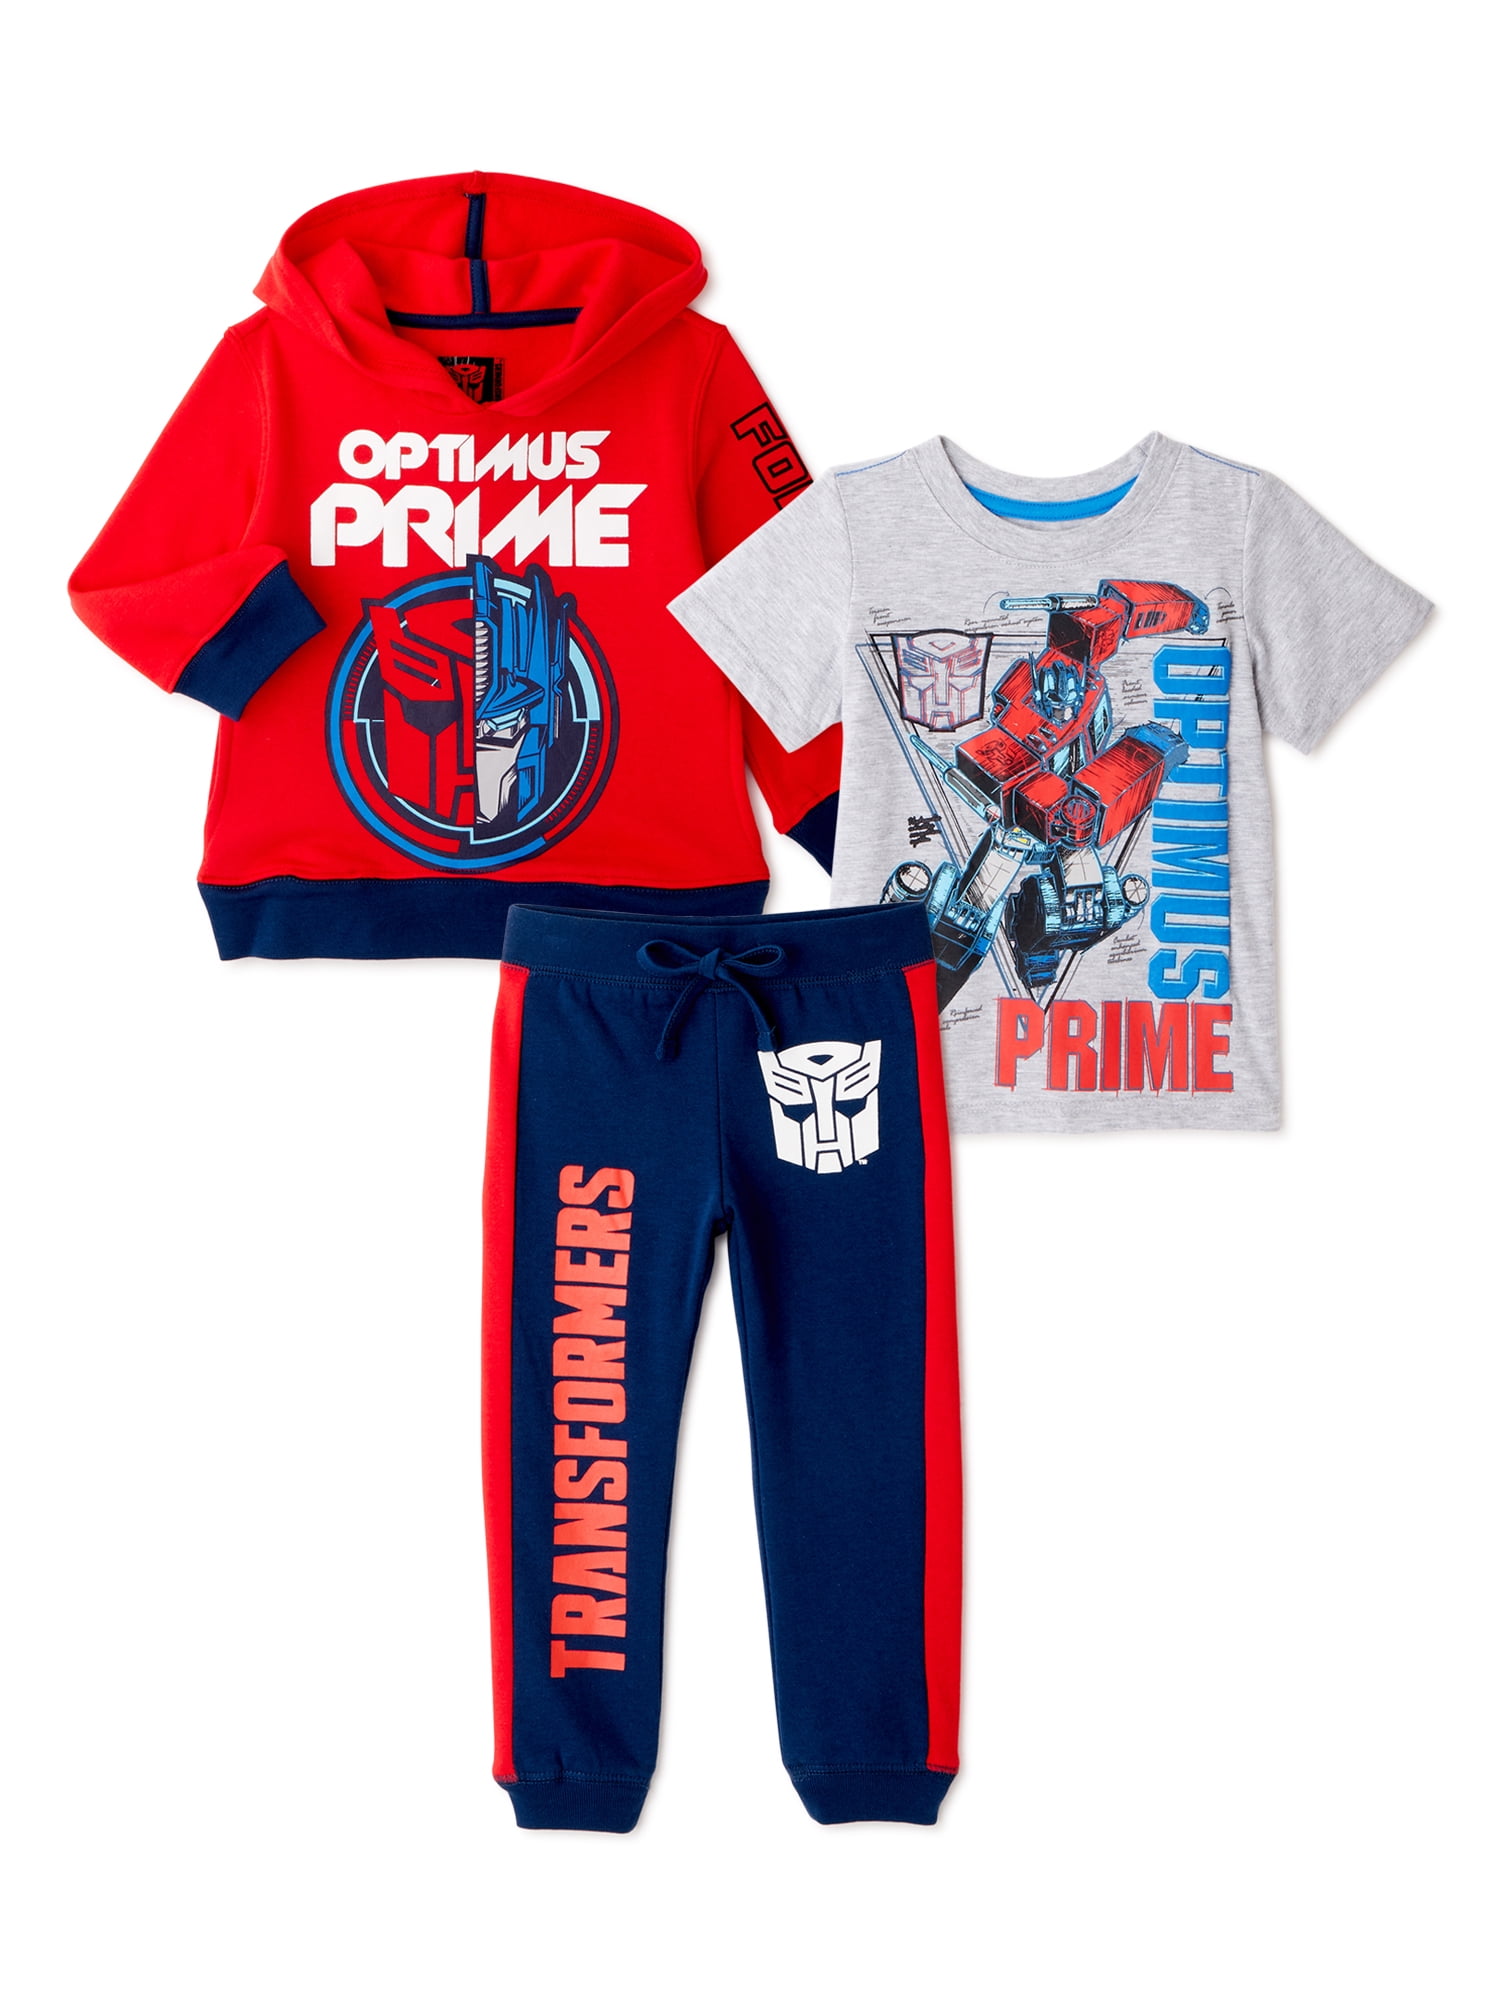 T-rans-forMers Re-sCue B-ots 2-Piece Tracksuit Sets Kids Hoodie and Sweatpants Suit Outfit Sweatshirt Set for Boys Girls 